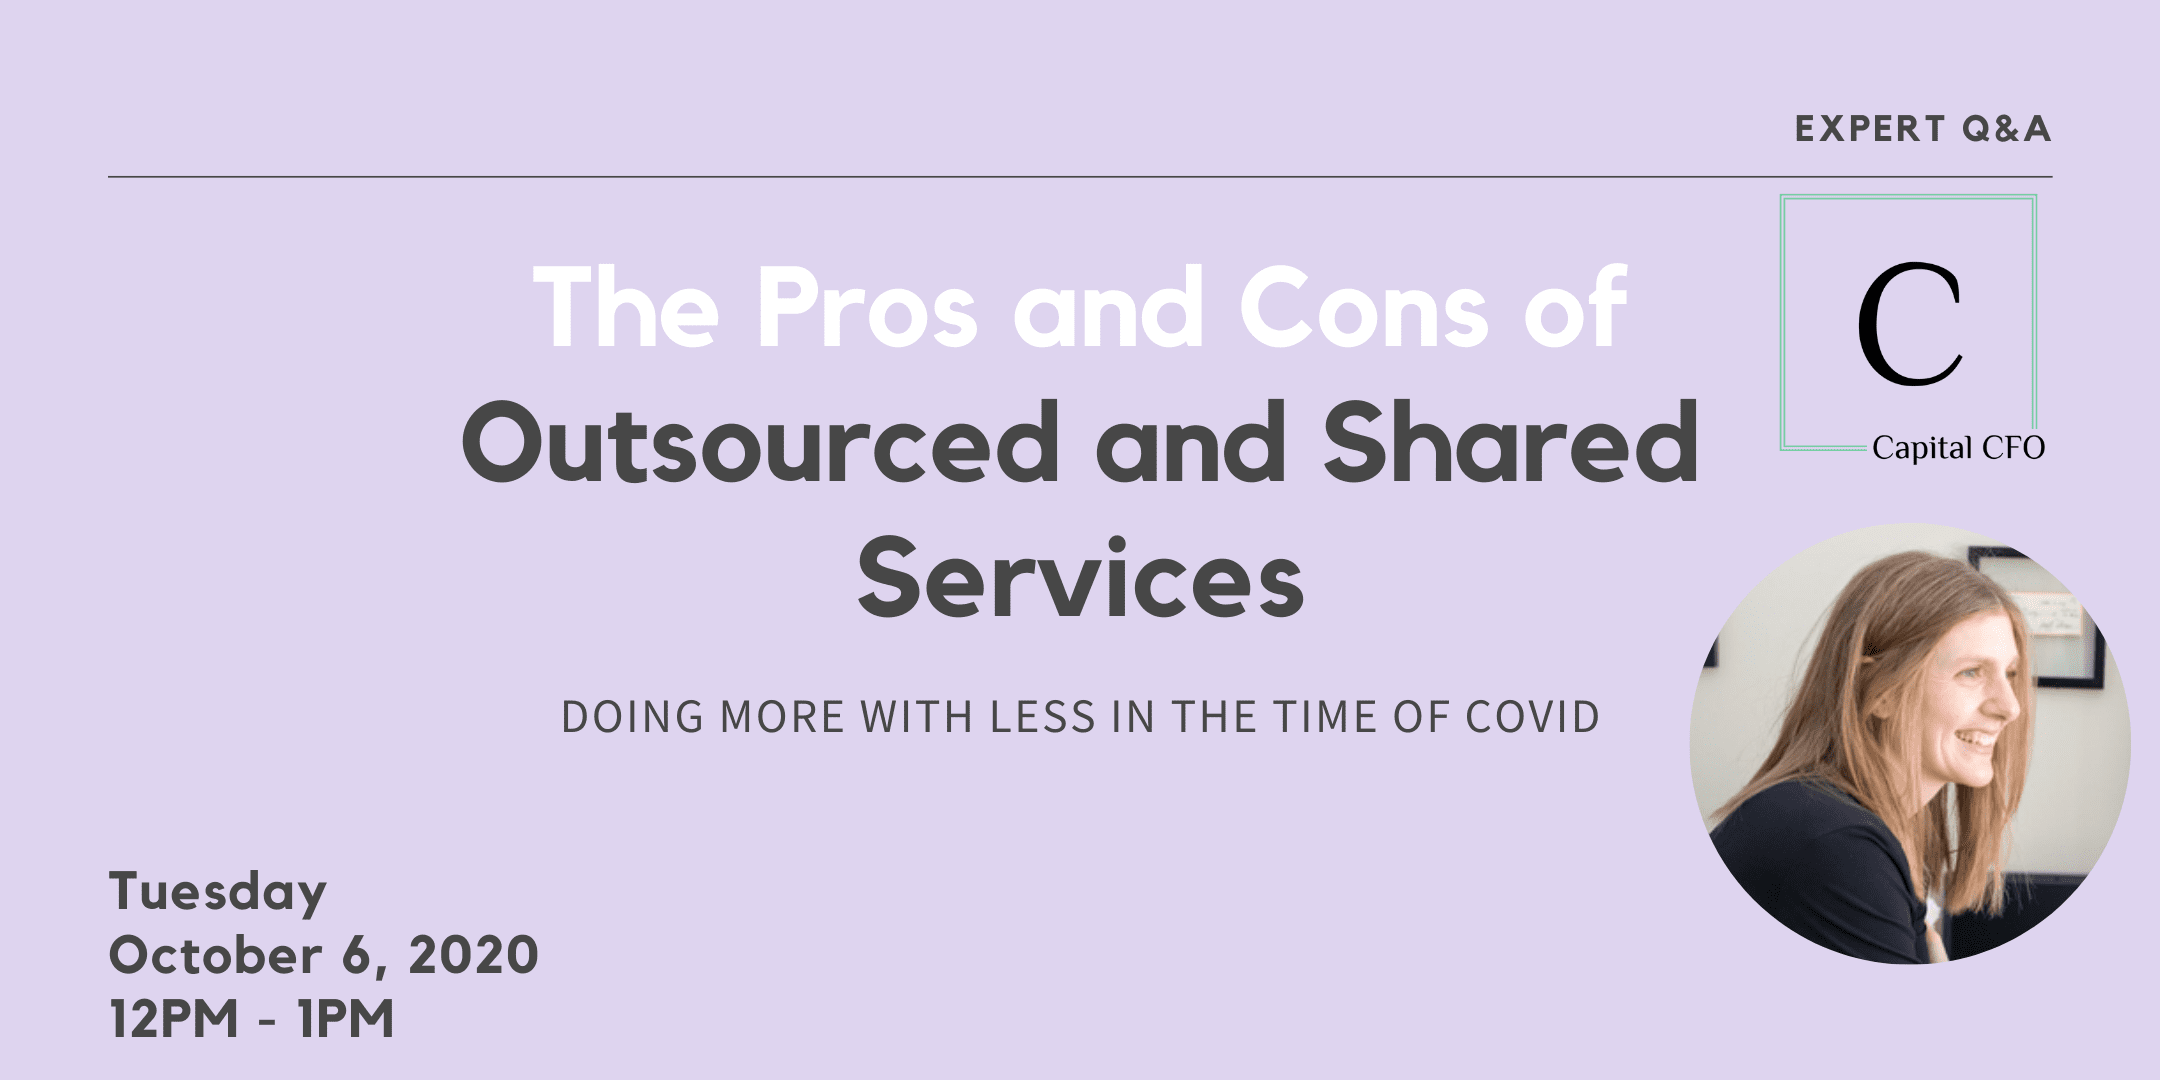 Pros and Cons of Outsourced and Shared Services